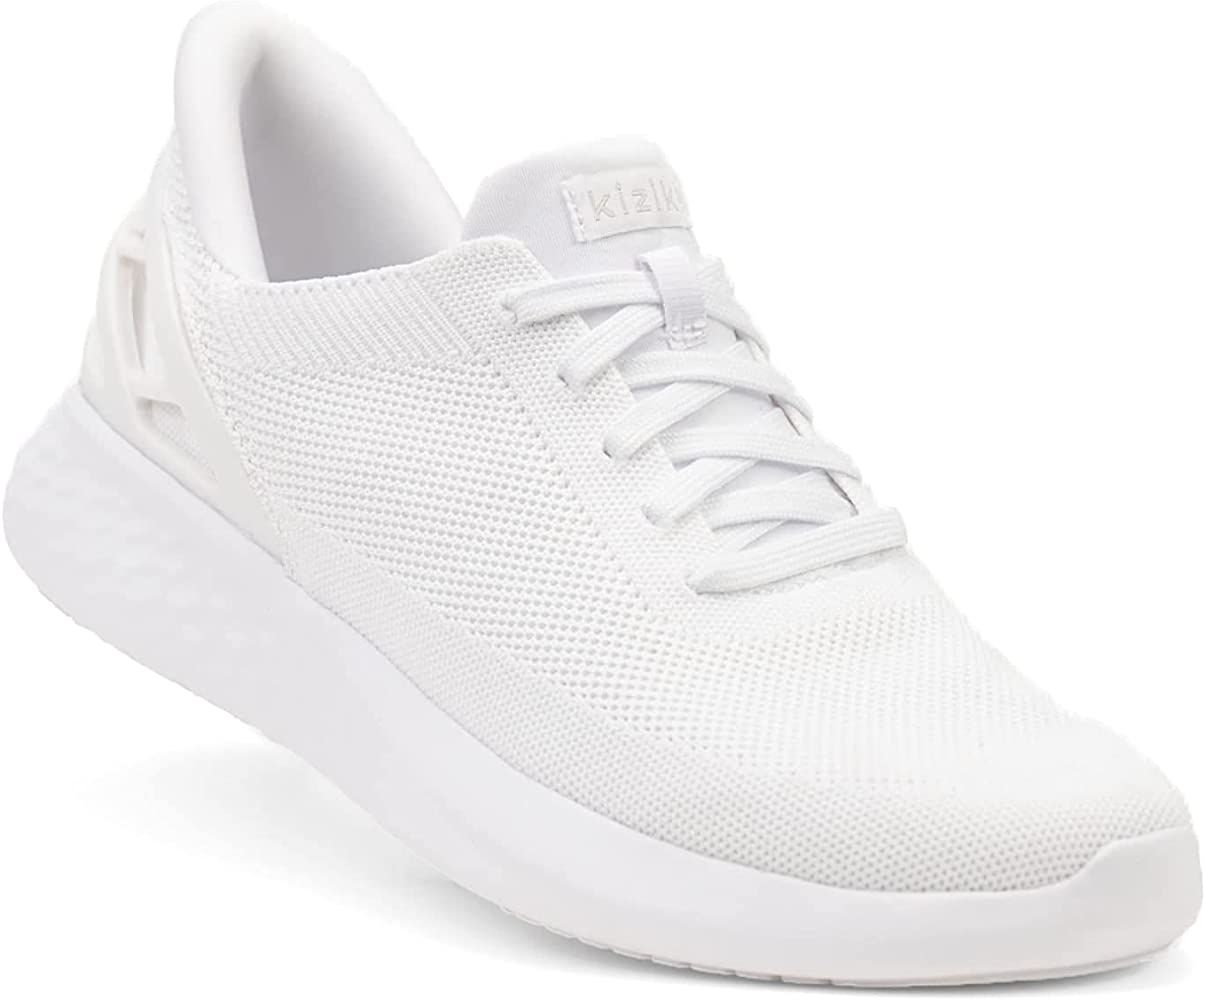 Kizik Athens Slip-On Sneakers, Casual Trendy Shoes for Women and Men | Amazon (US)